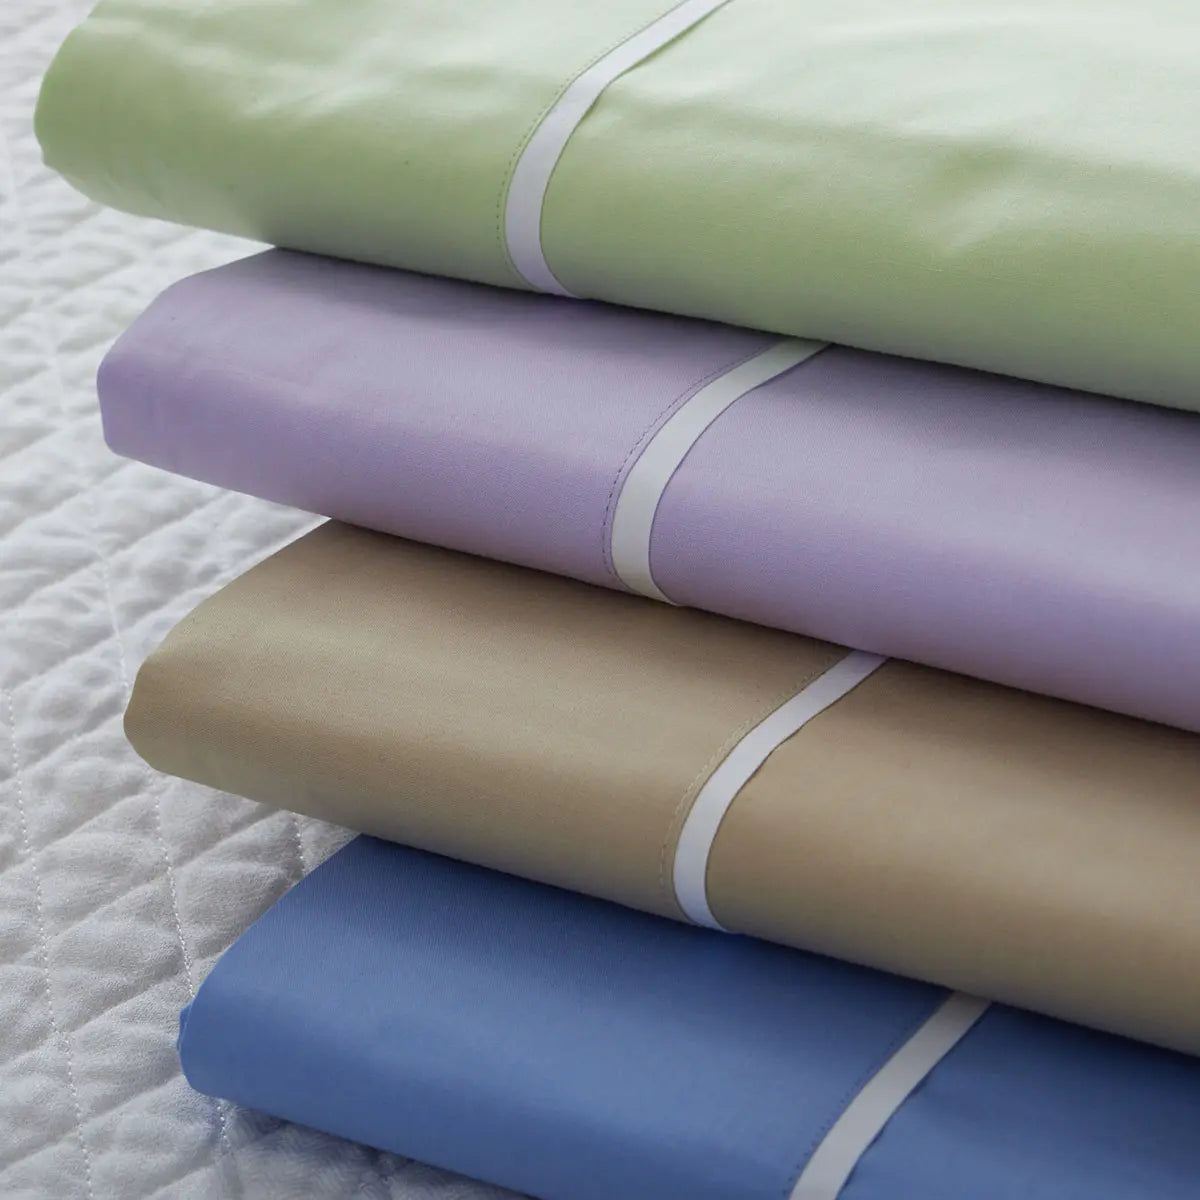 Gracious Home Bali Flat Sheet in various colors stacked together